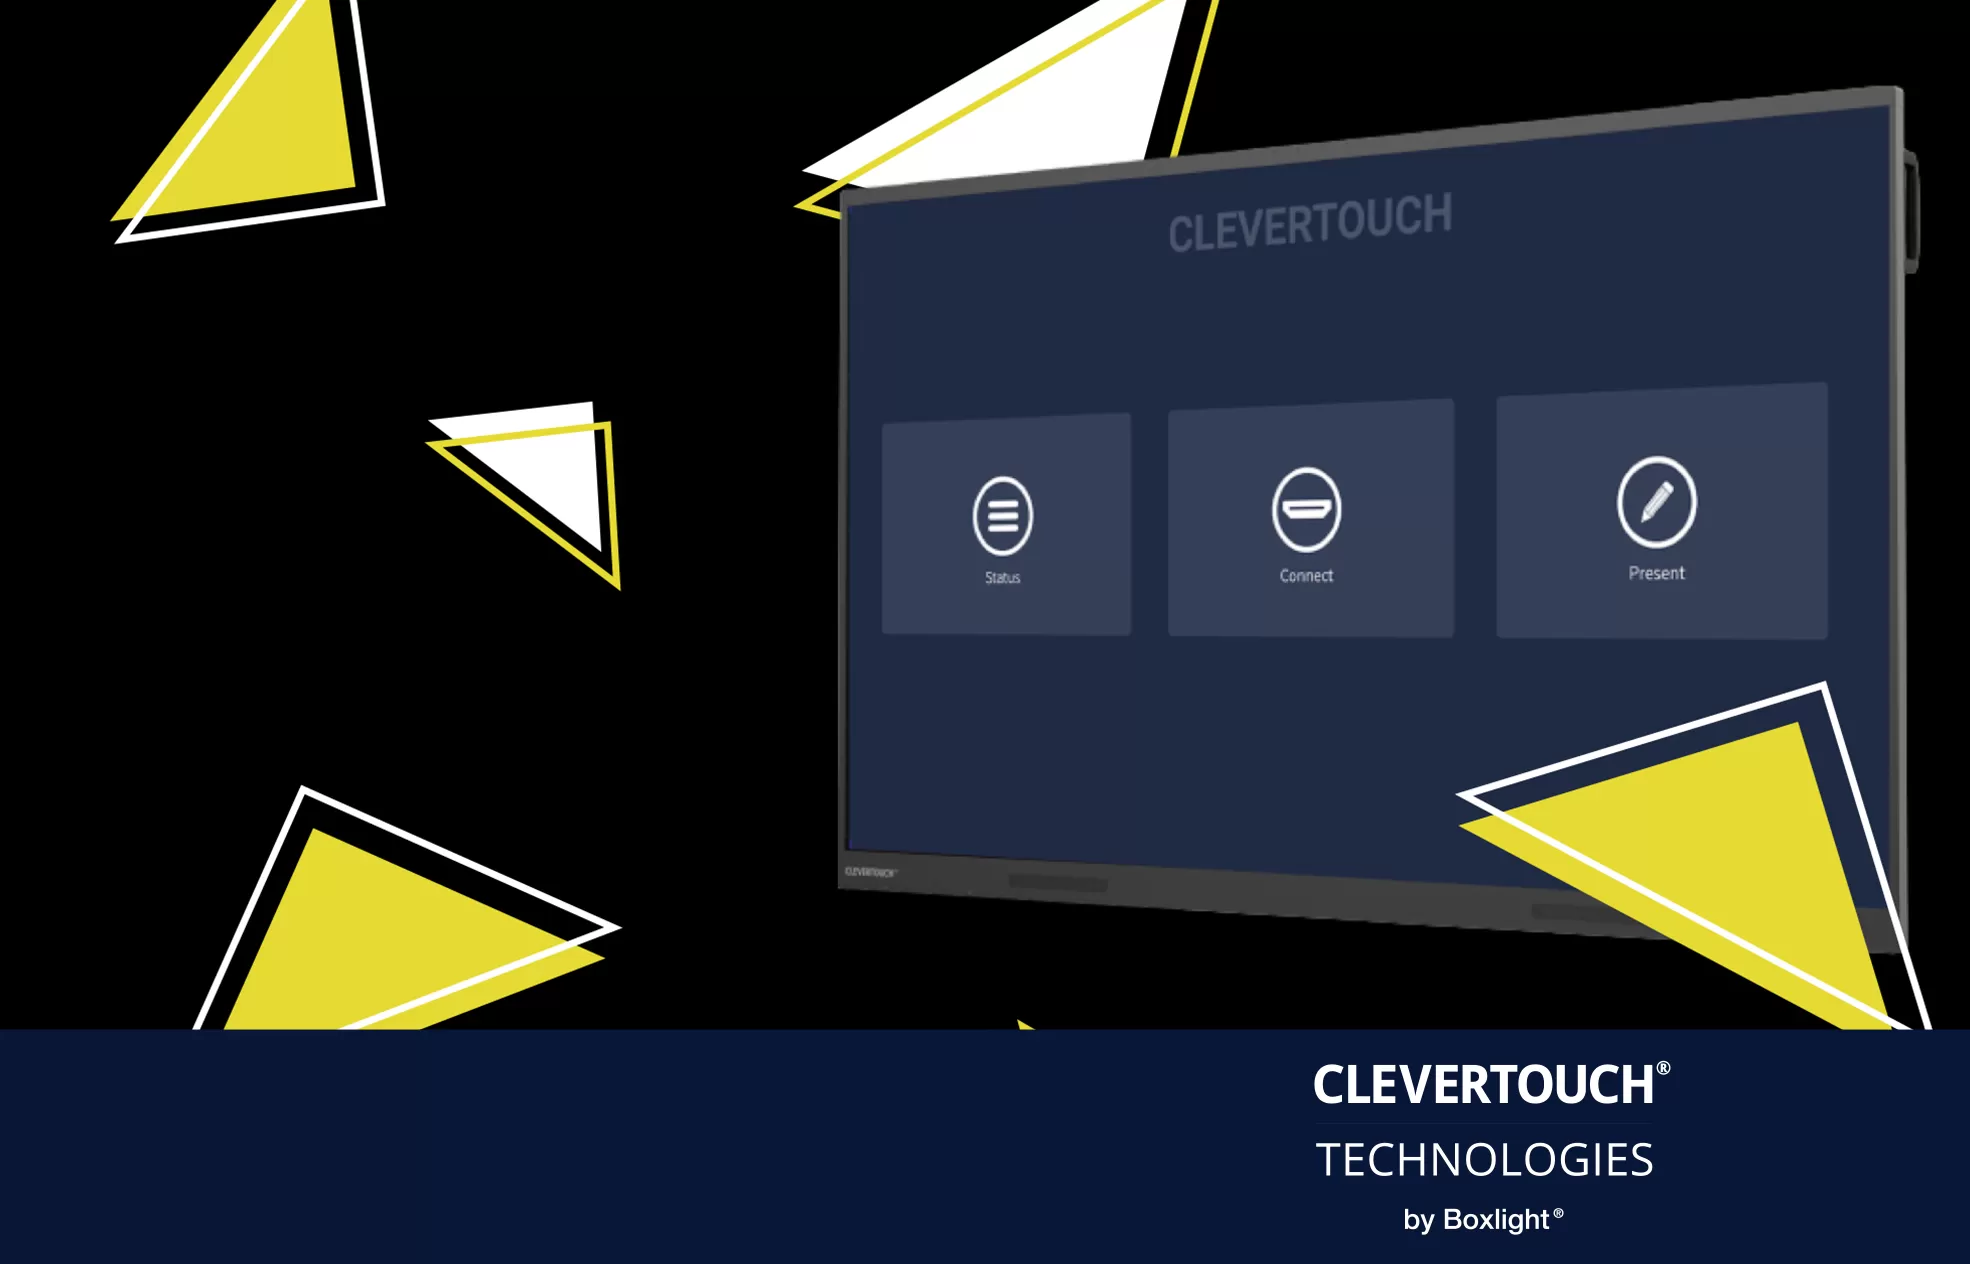 uxpro screen on a black background with yellow triangles and a banner saying 'Clevertouch technologies by Boxlight' across the bottom